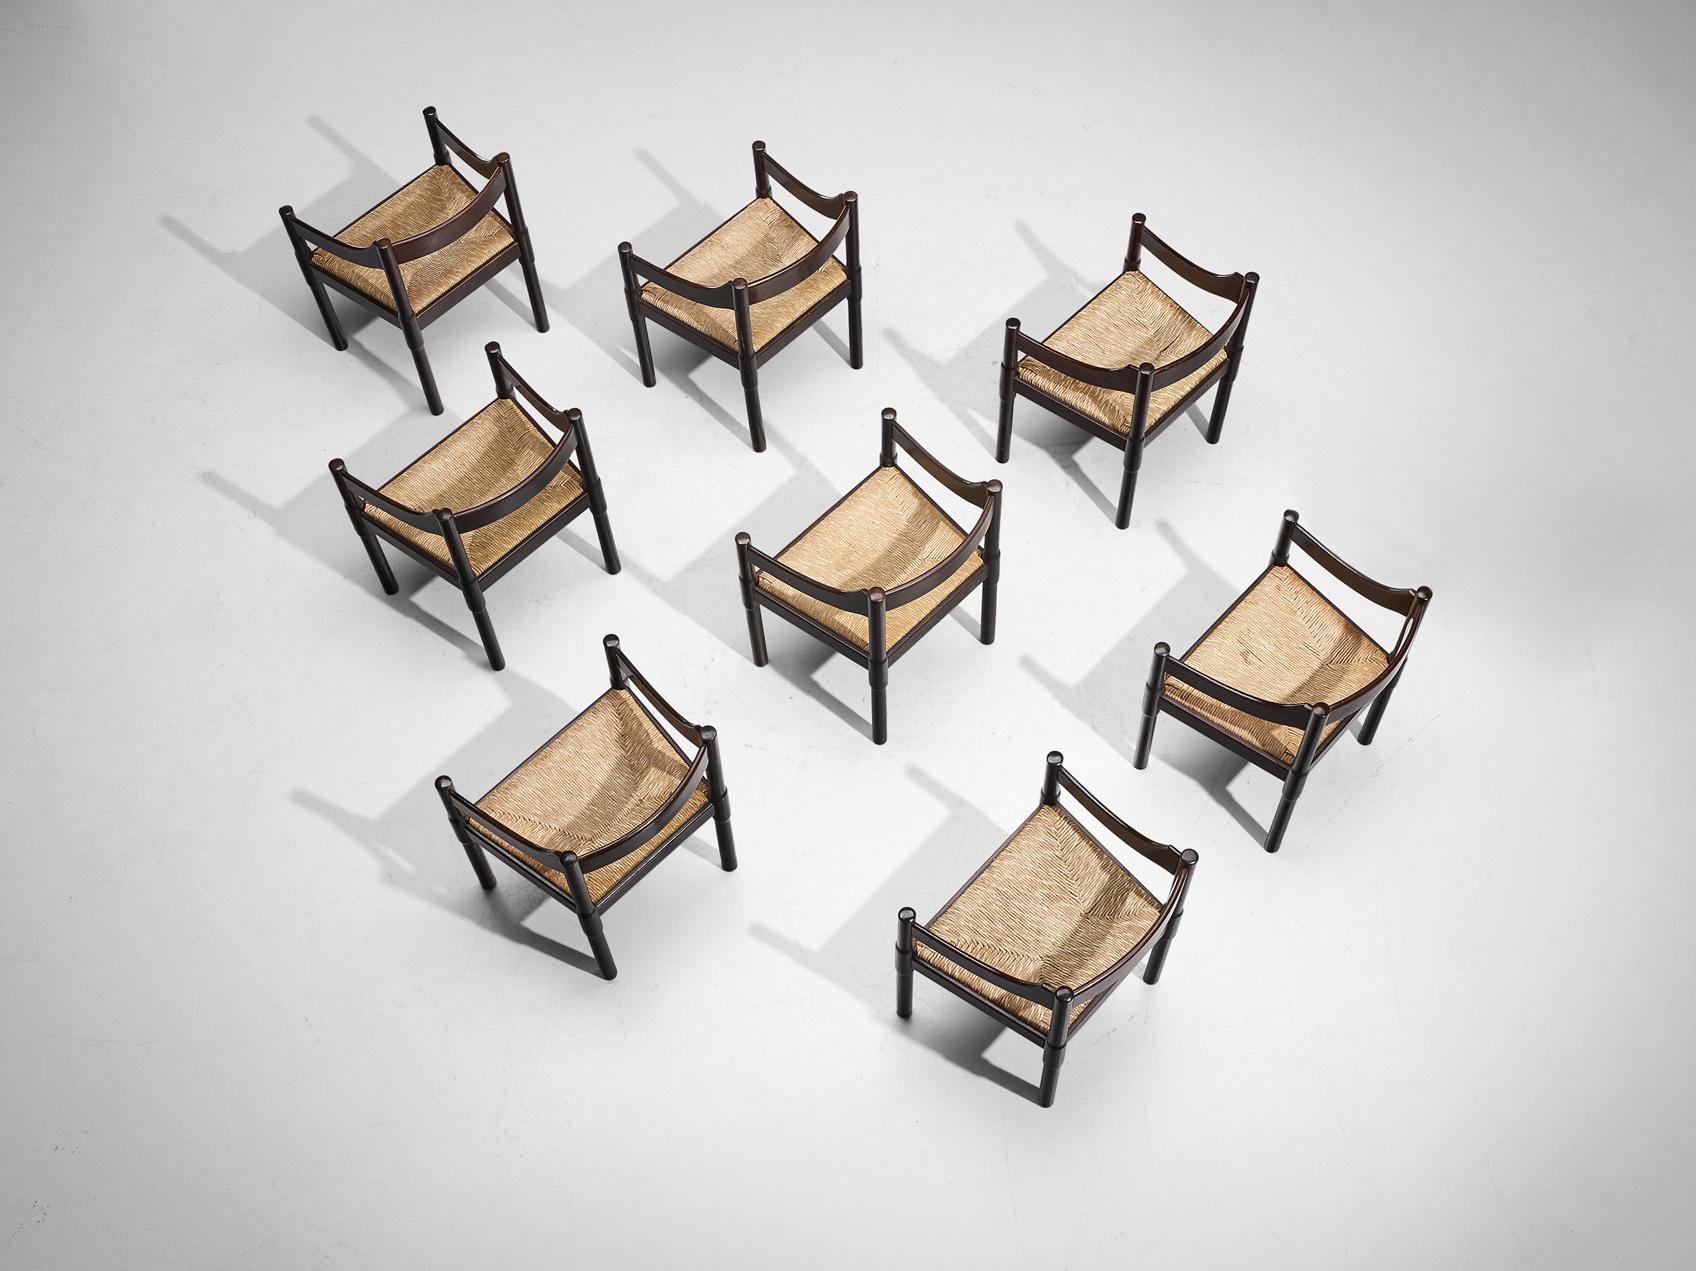 Vico Magistretti, set of eight ‘Carimate’ armchairs, model '892', stained beech, rush, Italy, design 1963

The ‘Carimate’ chair is one of Vico Magistretti’s most famous chairs. Originally designed in a red color for the ‘Carimate Golf Club’ in Italy